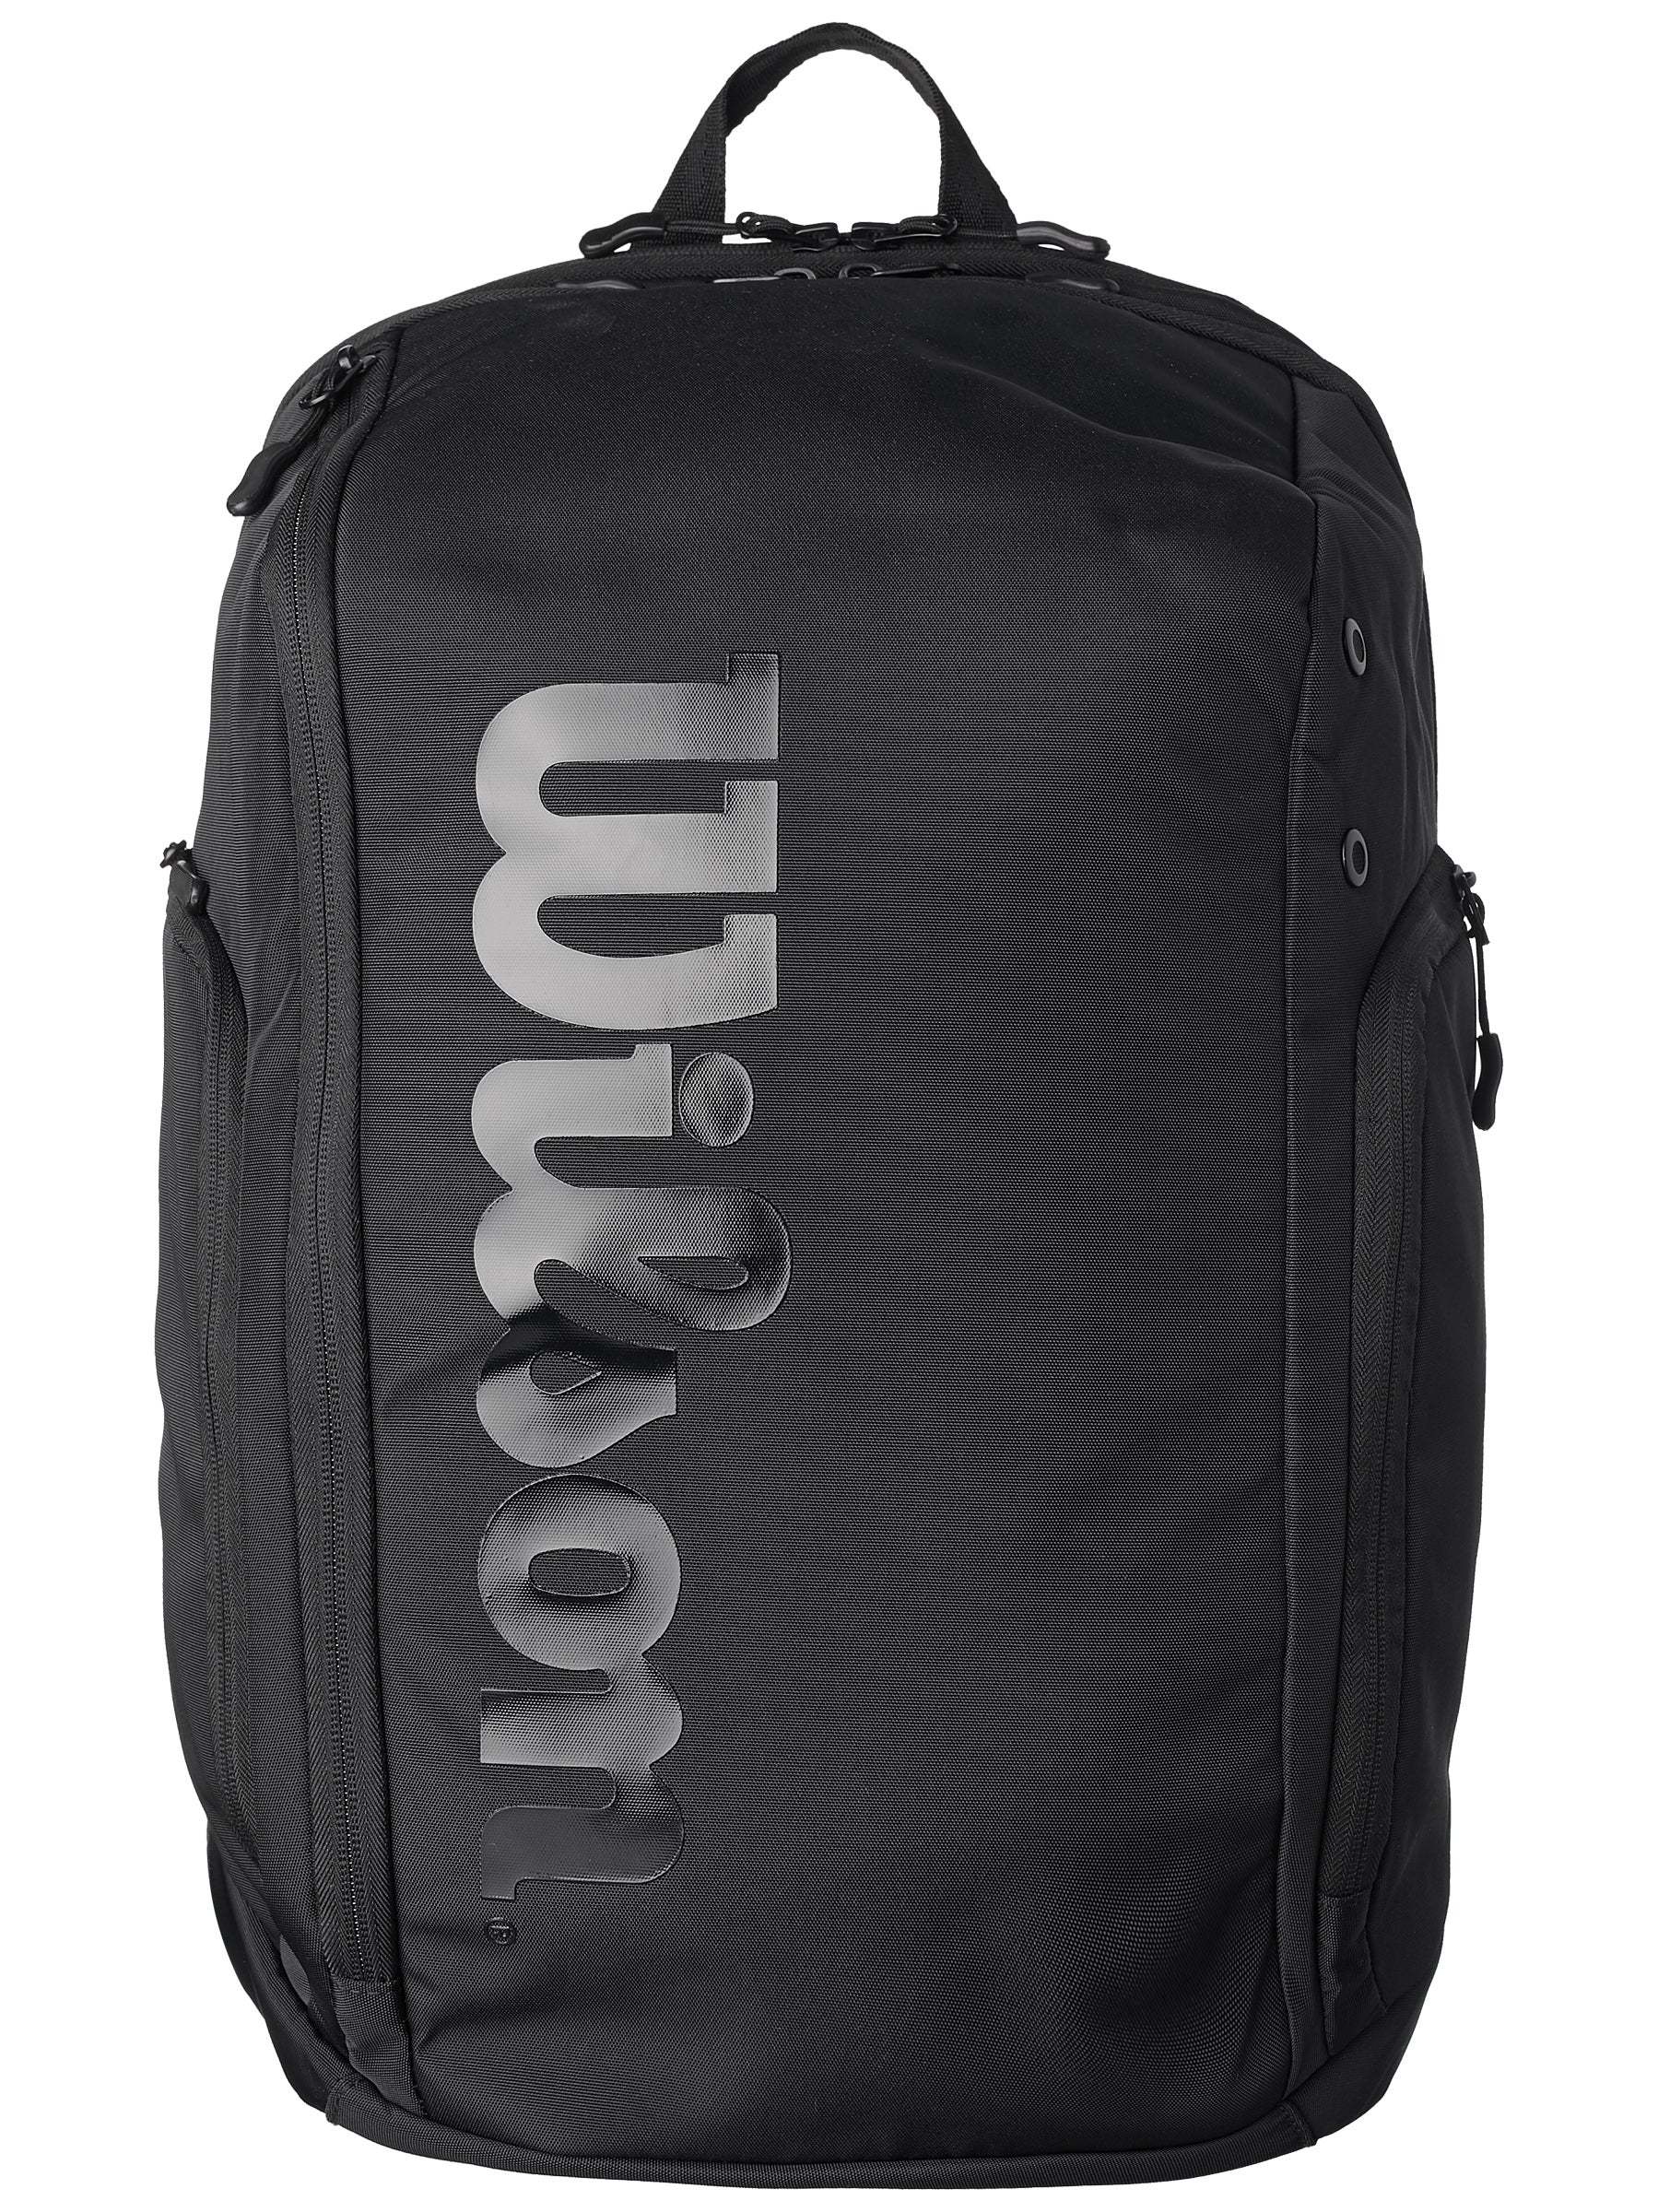 wilson pro staff tour backpack